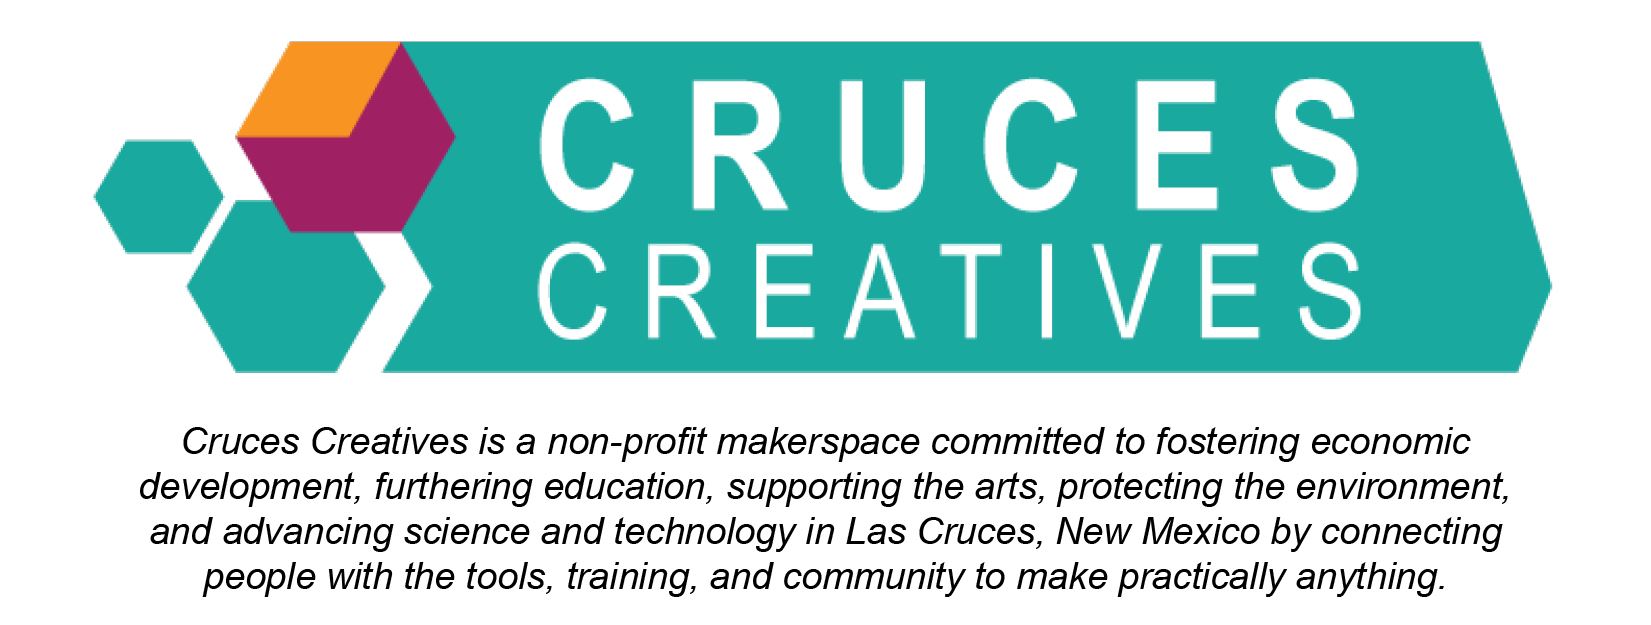 Cruces Creatives logo and mission statement, cruces creatives mission, cruces creatives logo